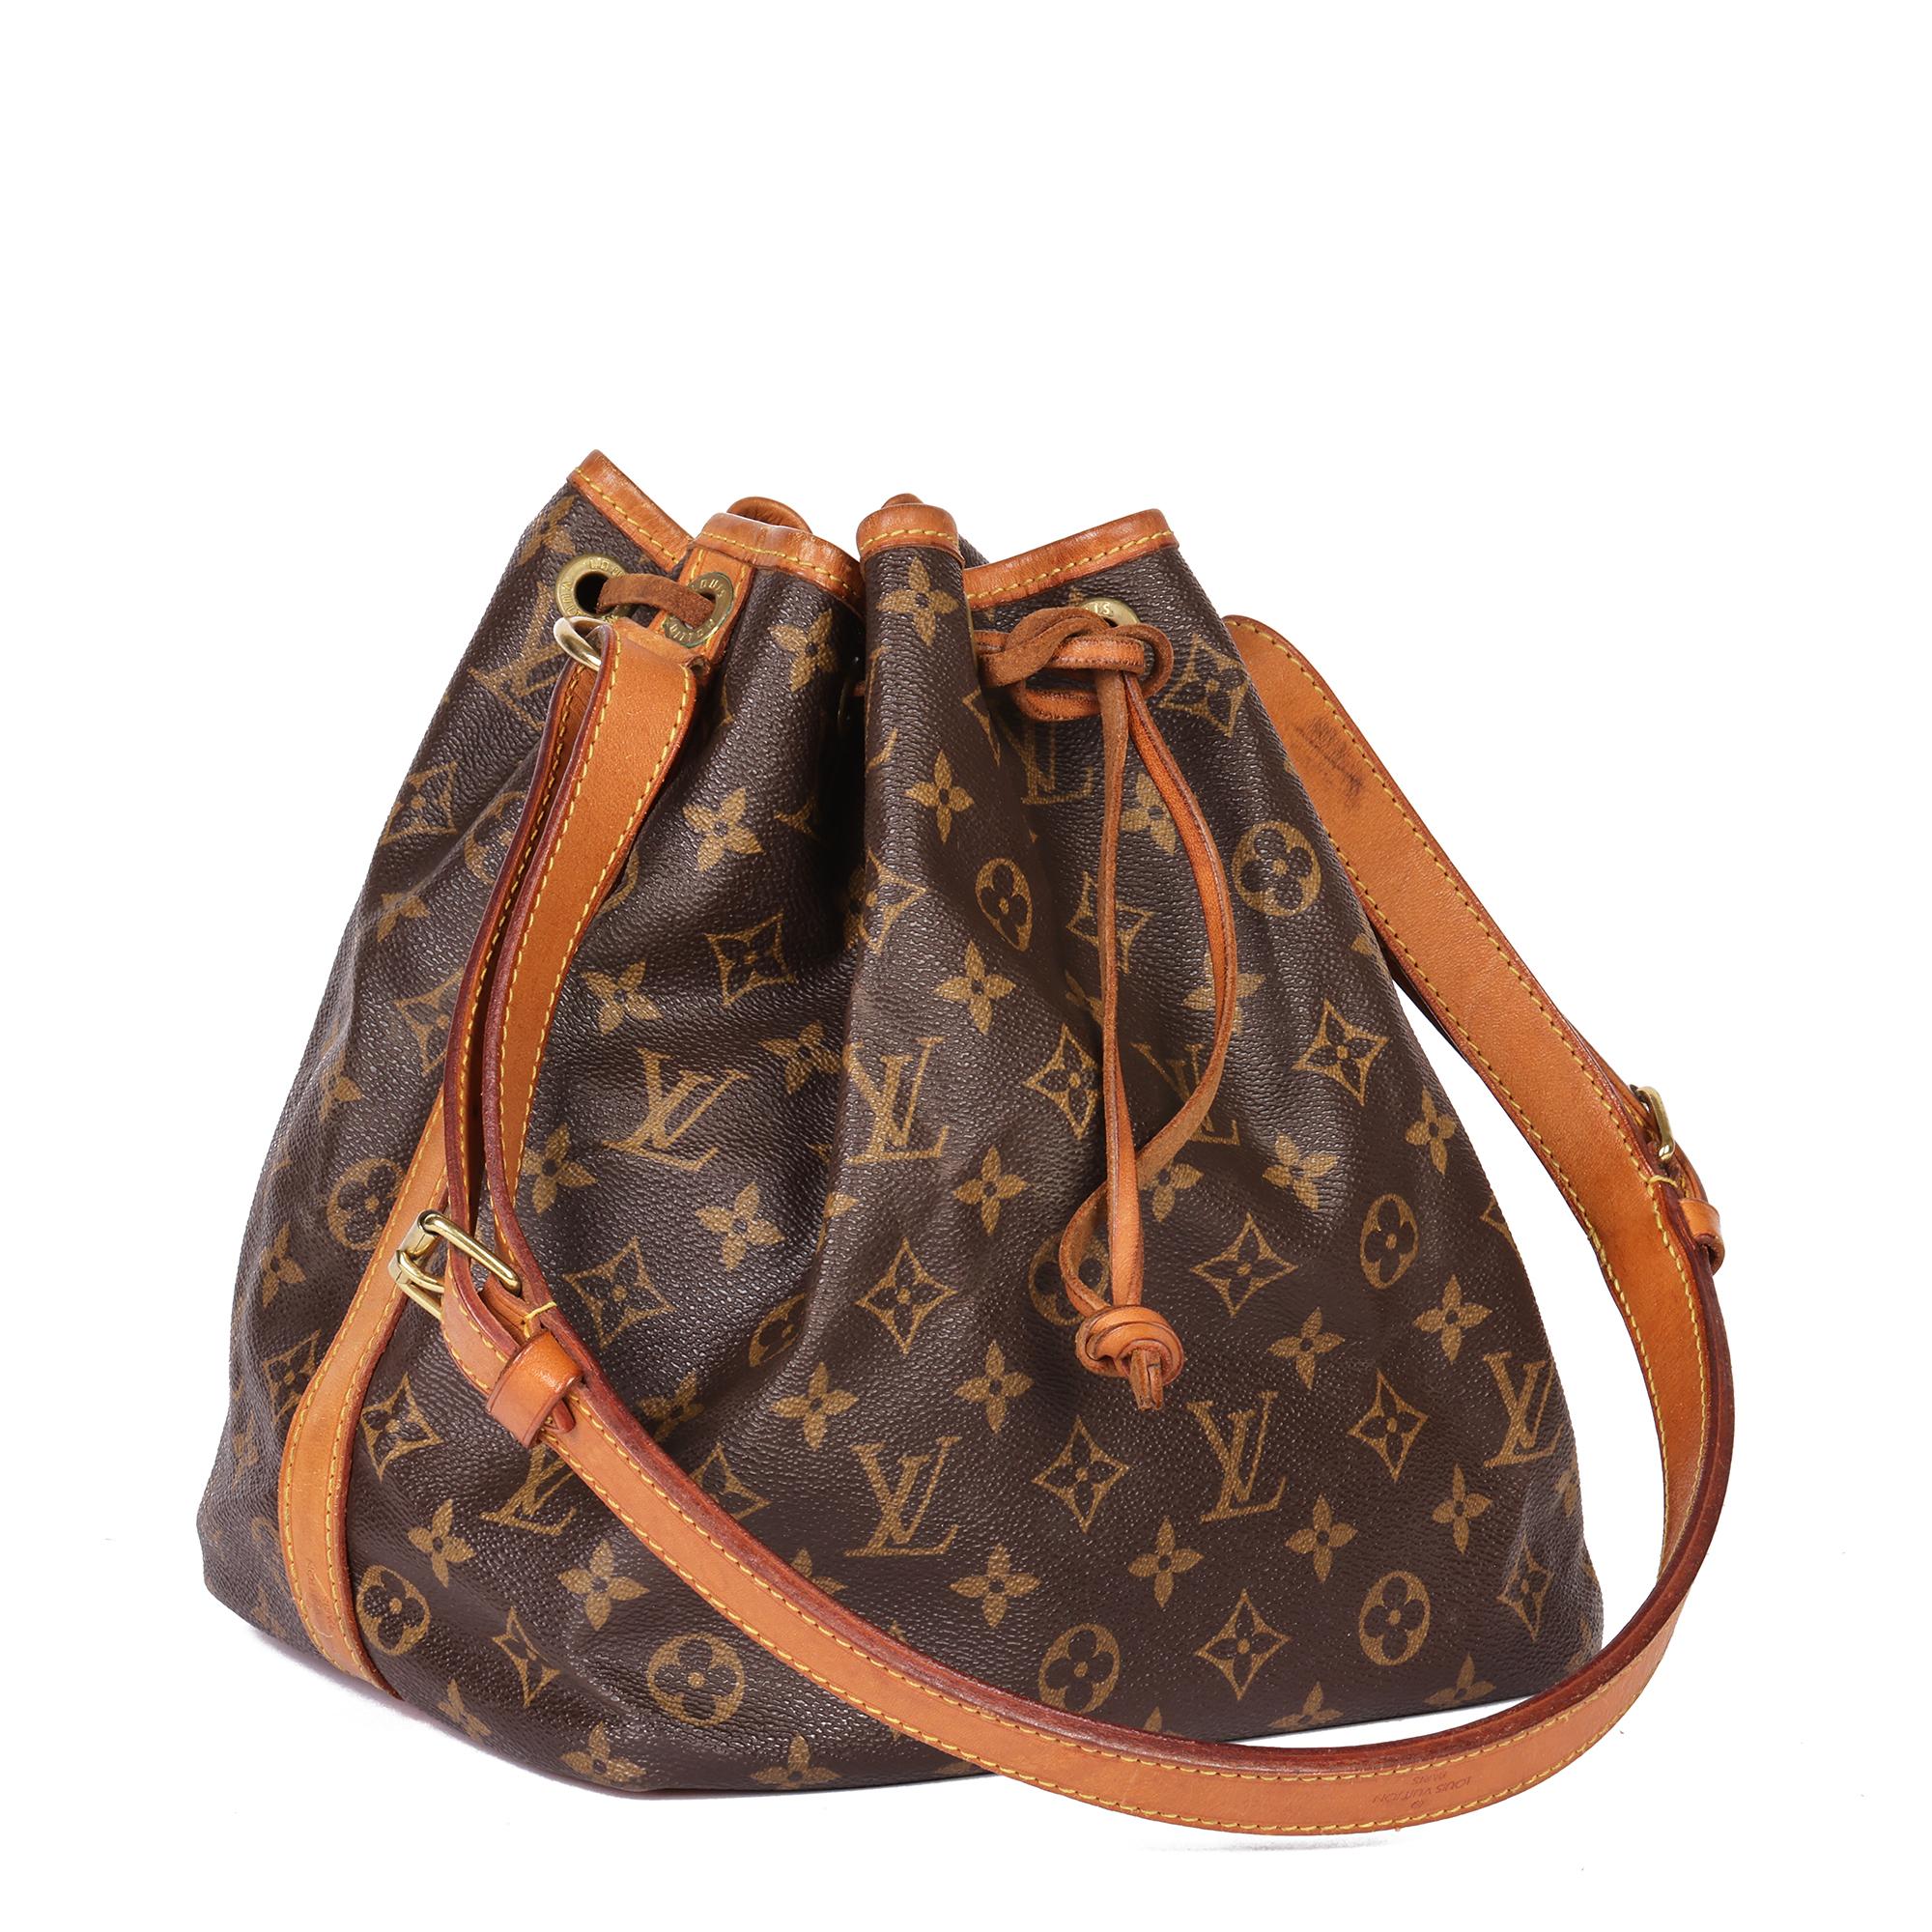 LOUIS VUITTON
Brown Monogram Coated Canvas and Vachetta Leather Vintage Petit Noé

Xupes Reference: HB4797
Age (Circa): 1990
Authenticity Details: Date Stamp (Made in France)
Gender: Ladies
Type: Shoulder

Colour: Brown
Hardware: Golden